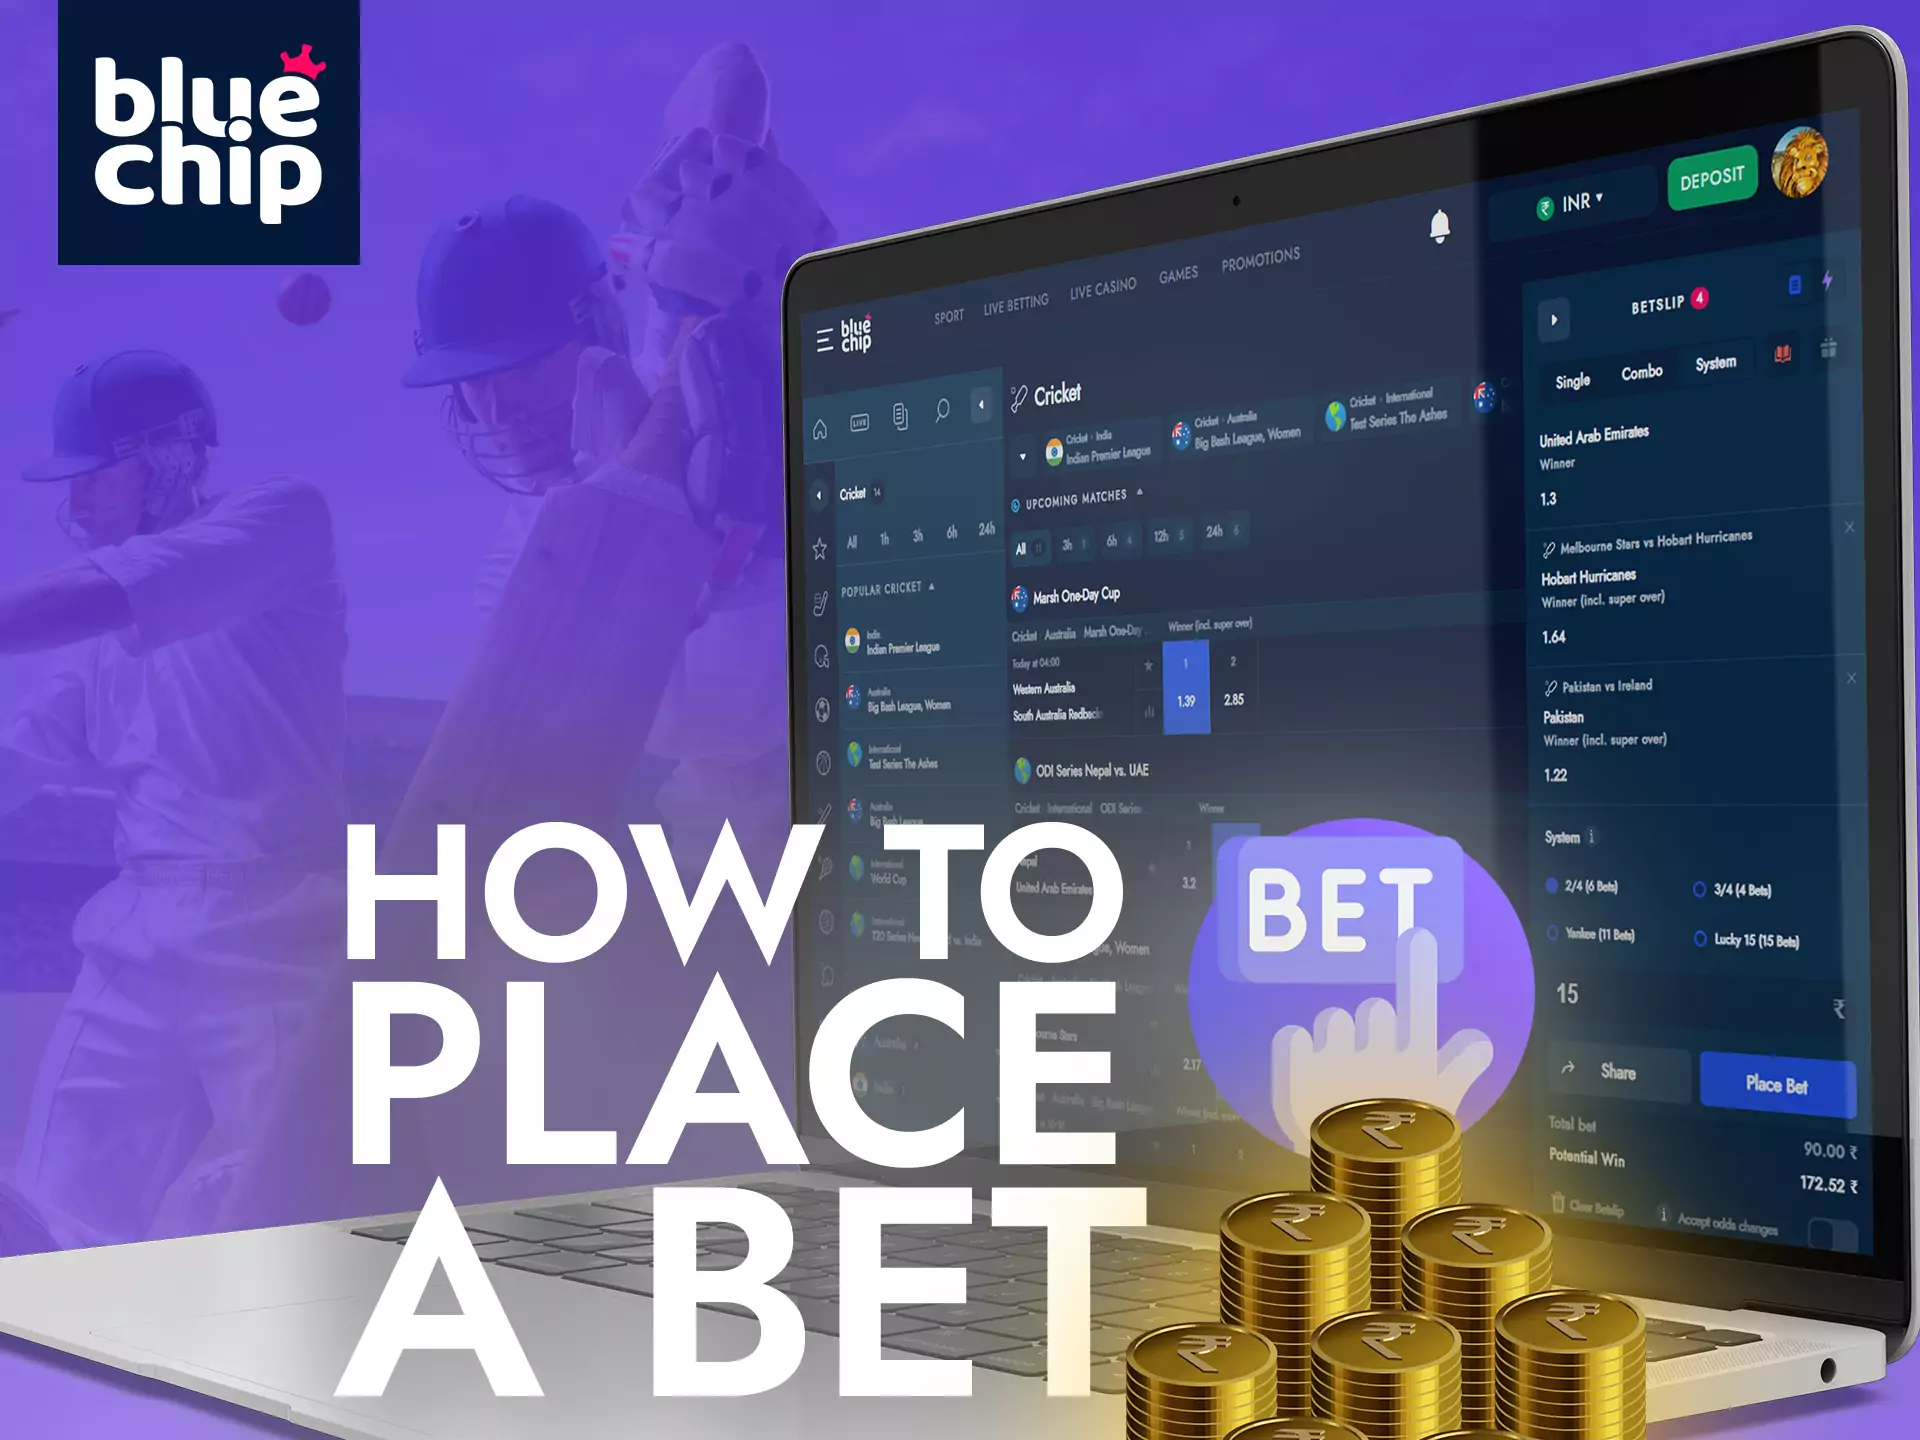 You can place bets on sports events on Bluechip.